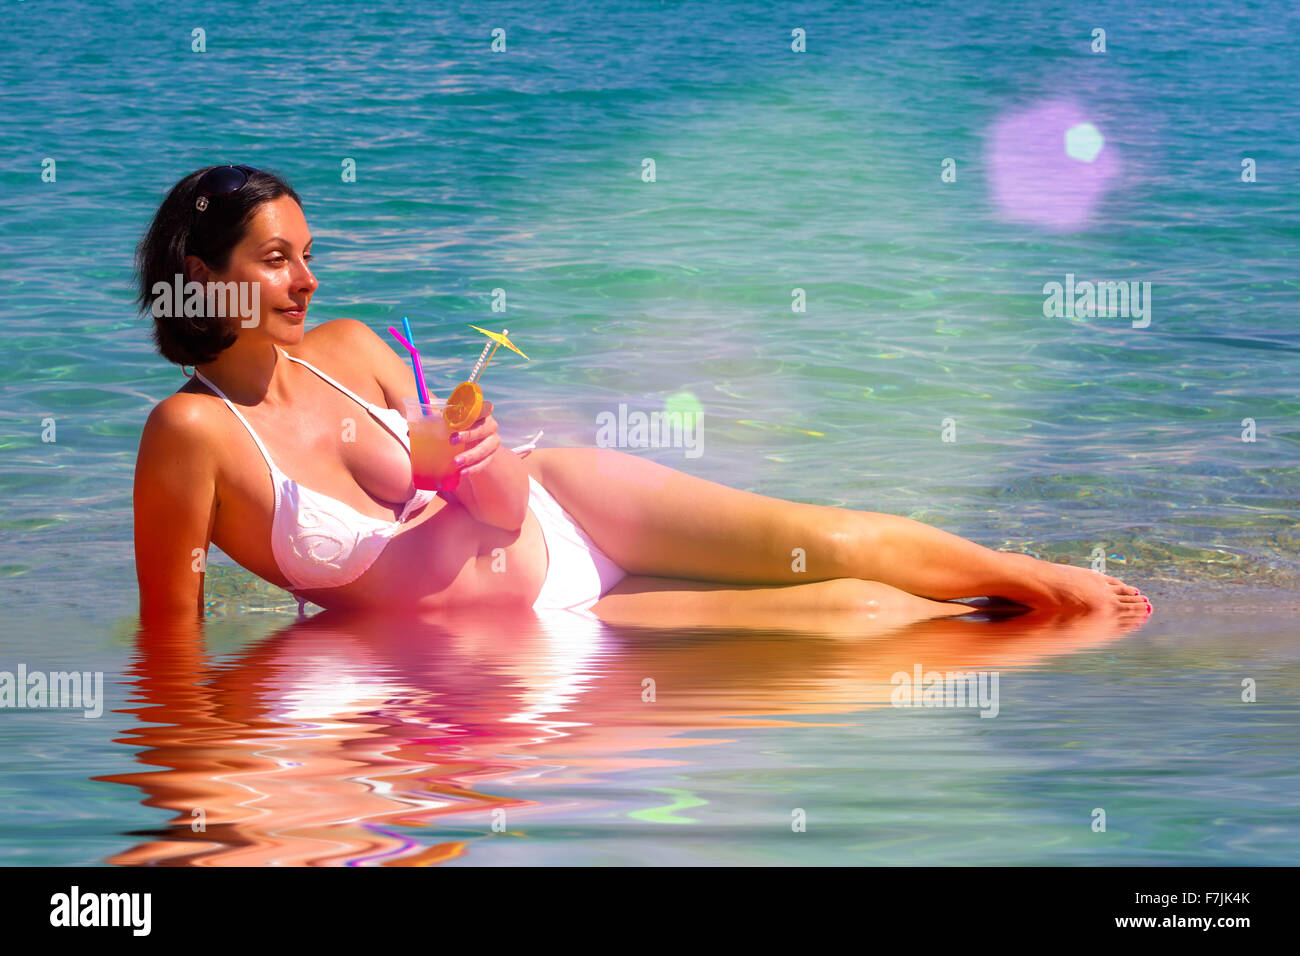 Enjoying in a cocktail and sea Stock Photo